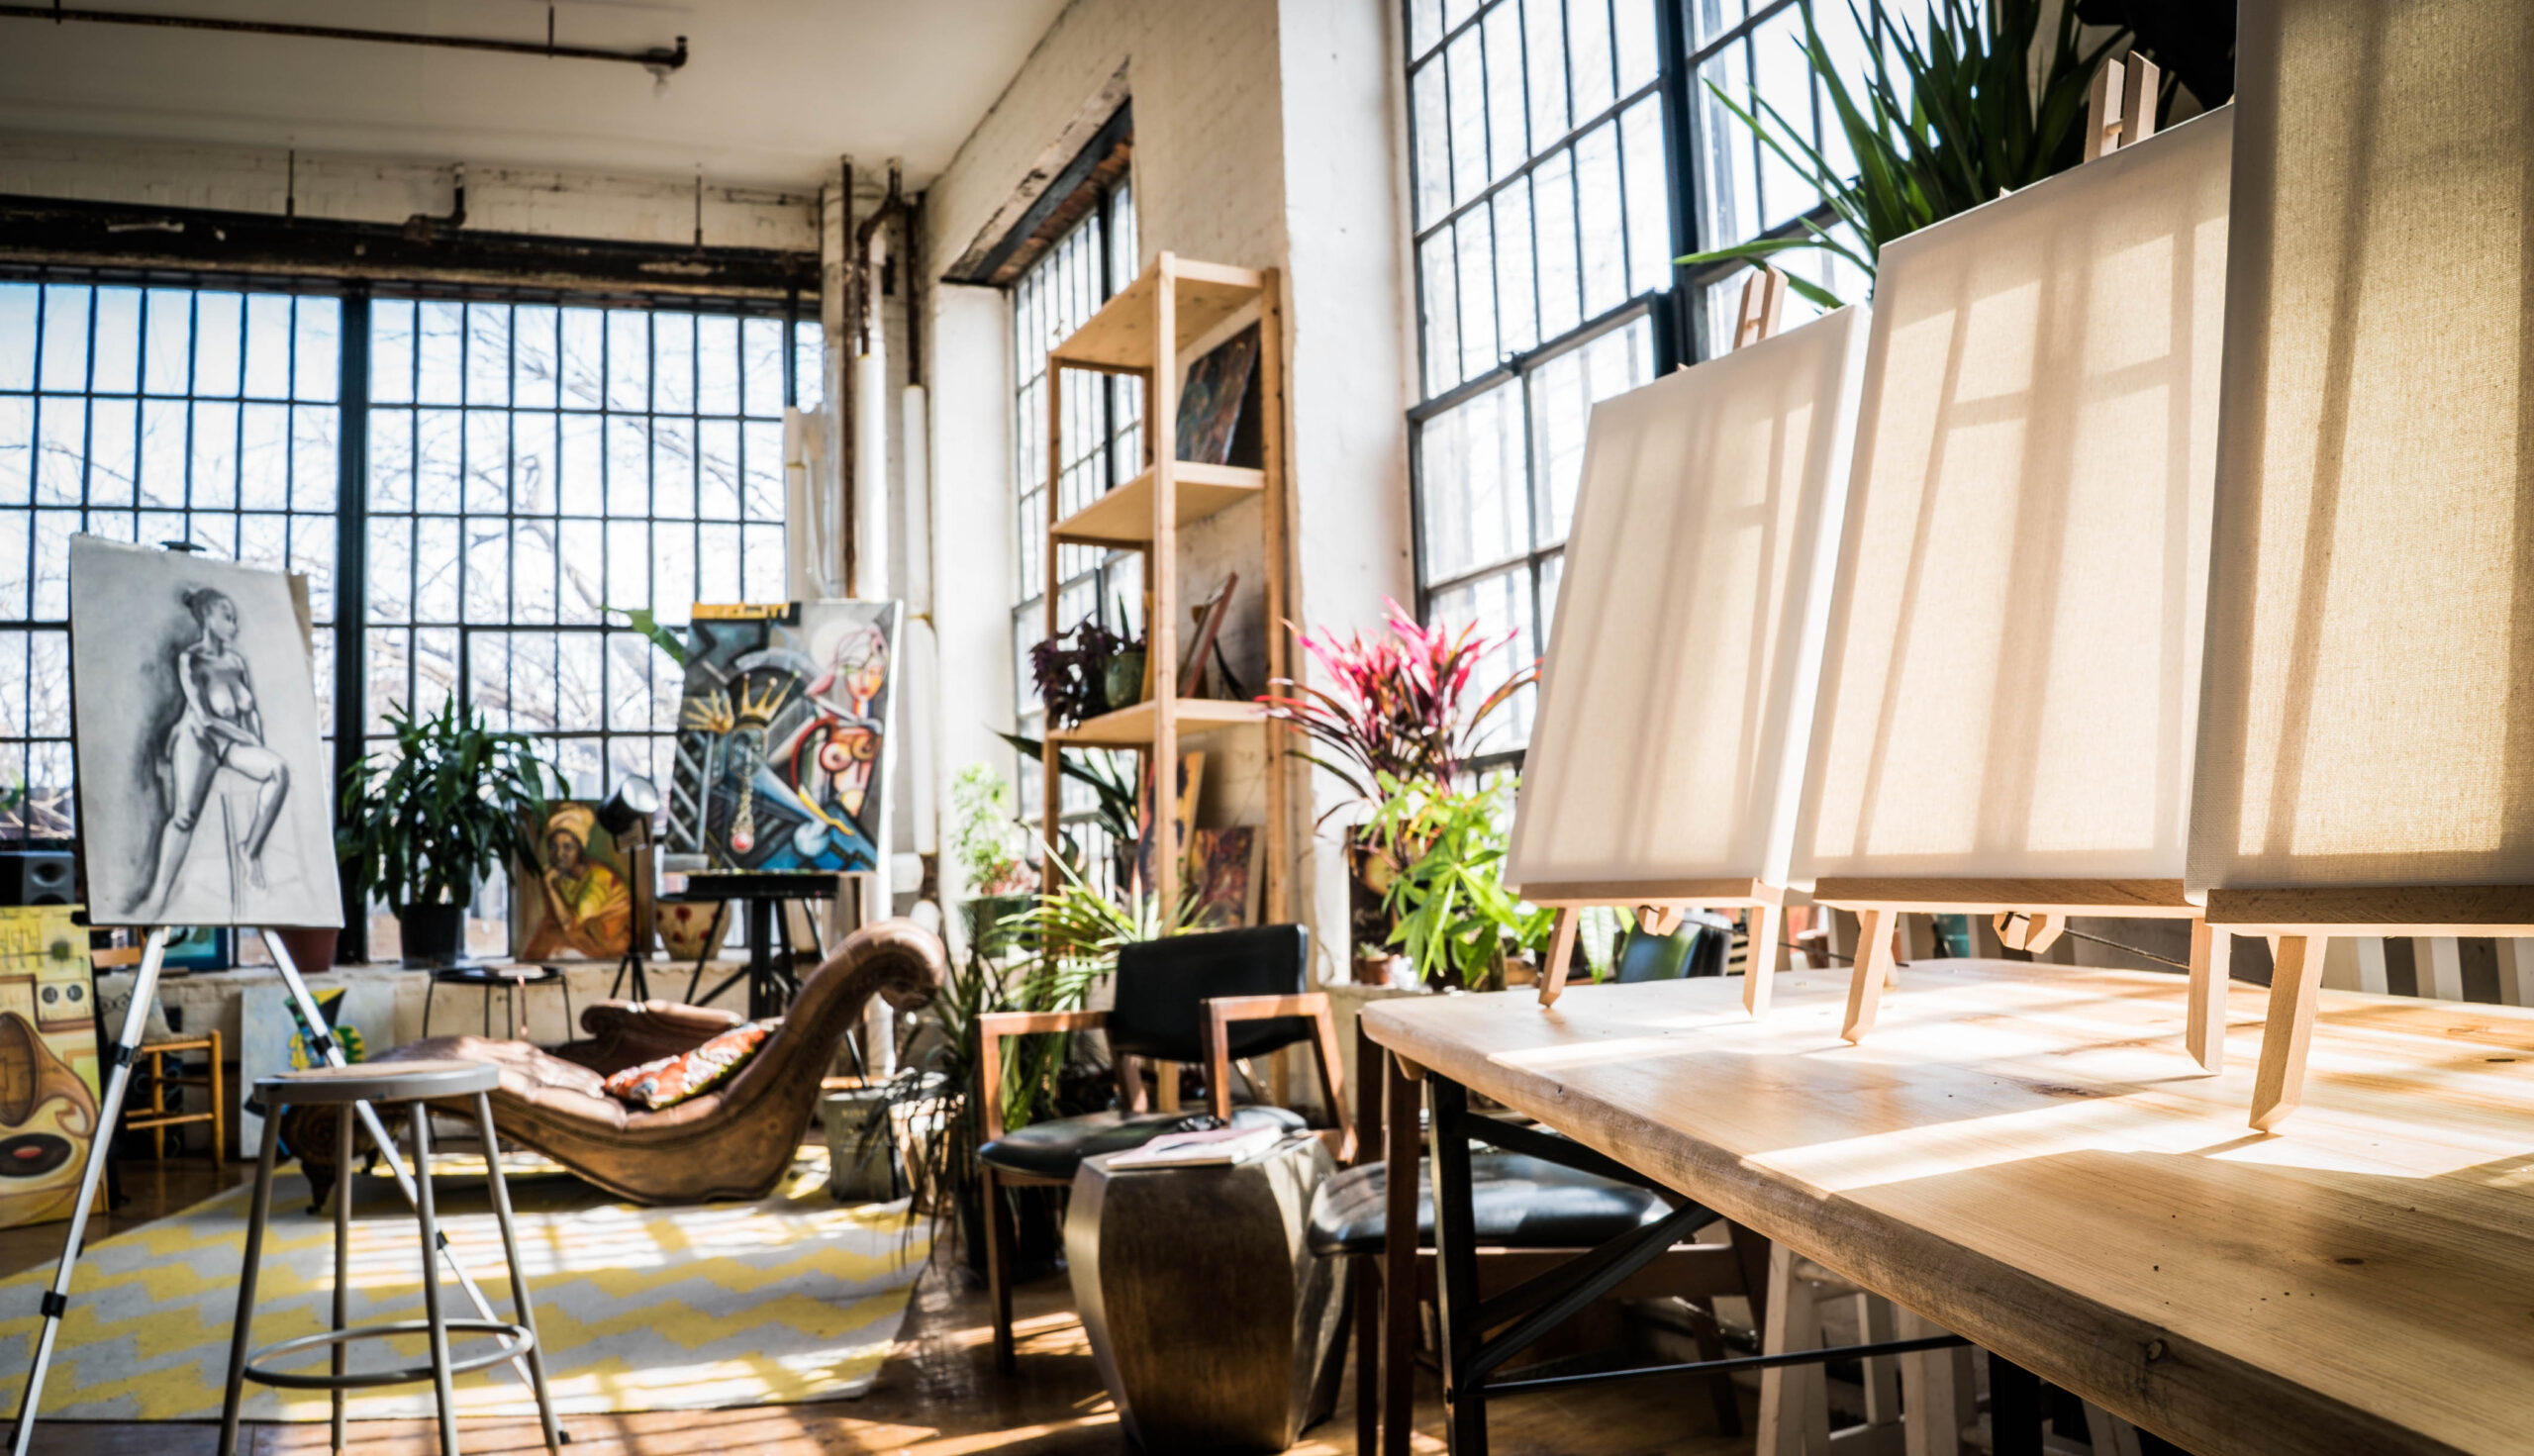 Gorgeous sunny art studio with two walls of industrial windows